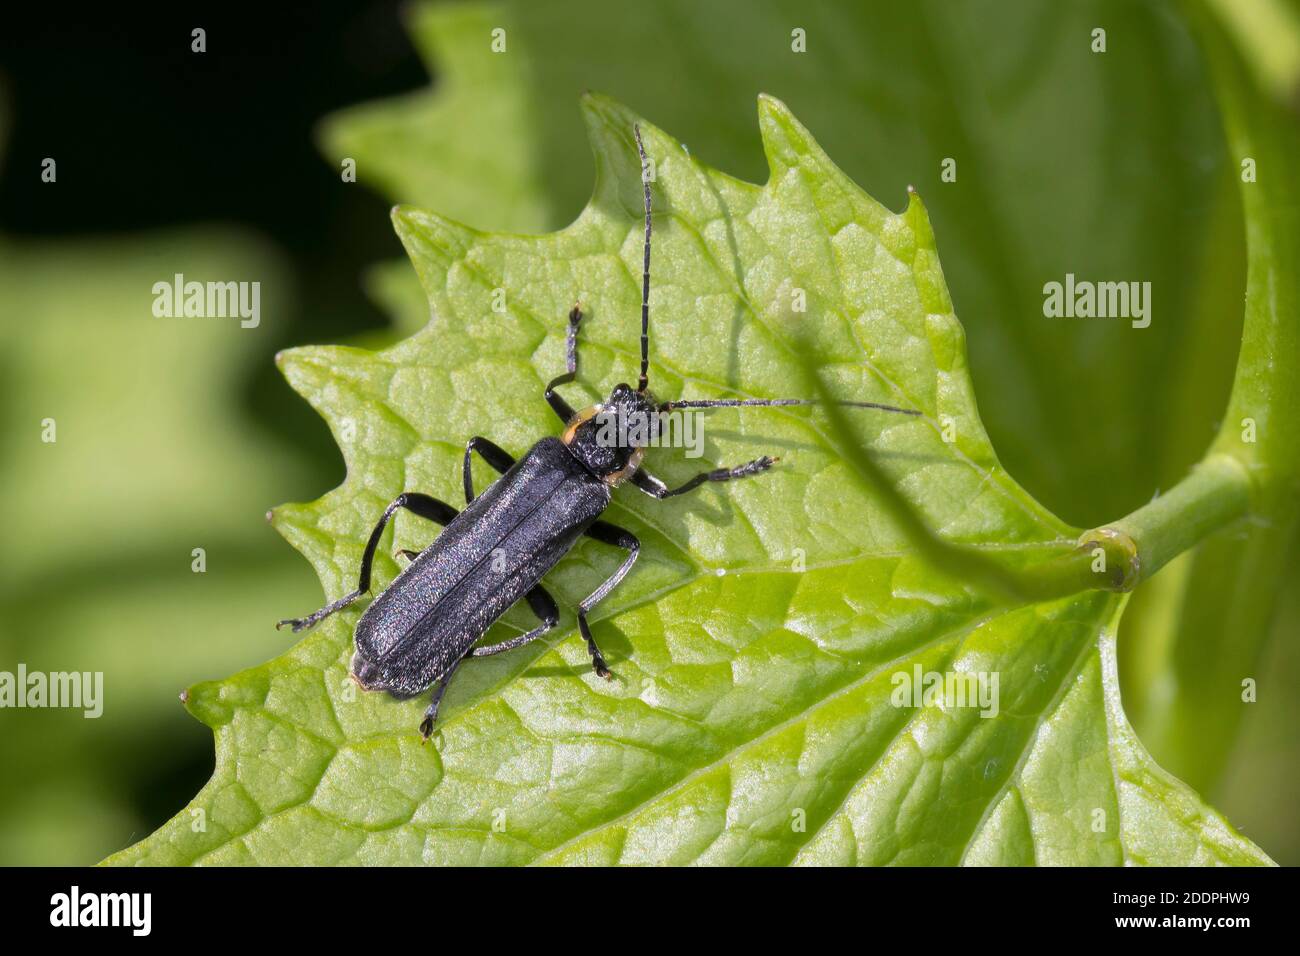 Black soldier beetle (Cantharis obscura, Cantharis bicolor), sitting on a leaf, dorsal view, Germany Stock Photo